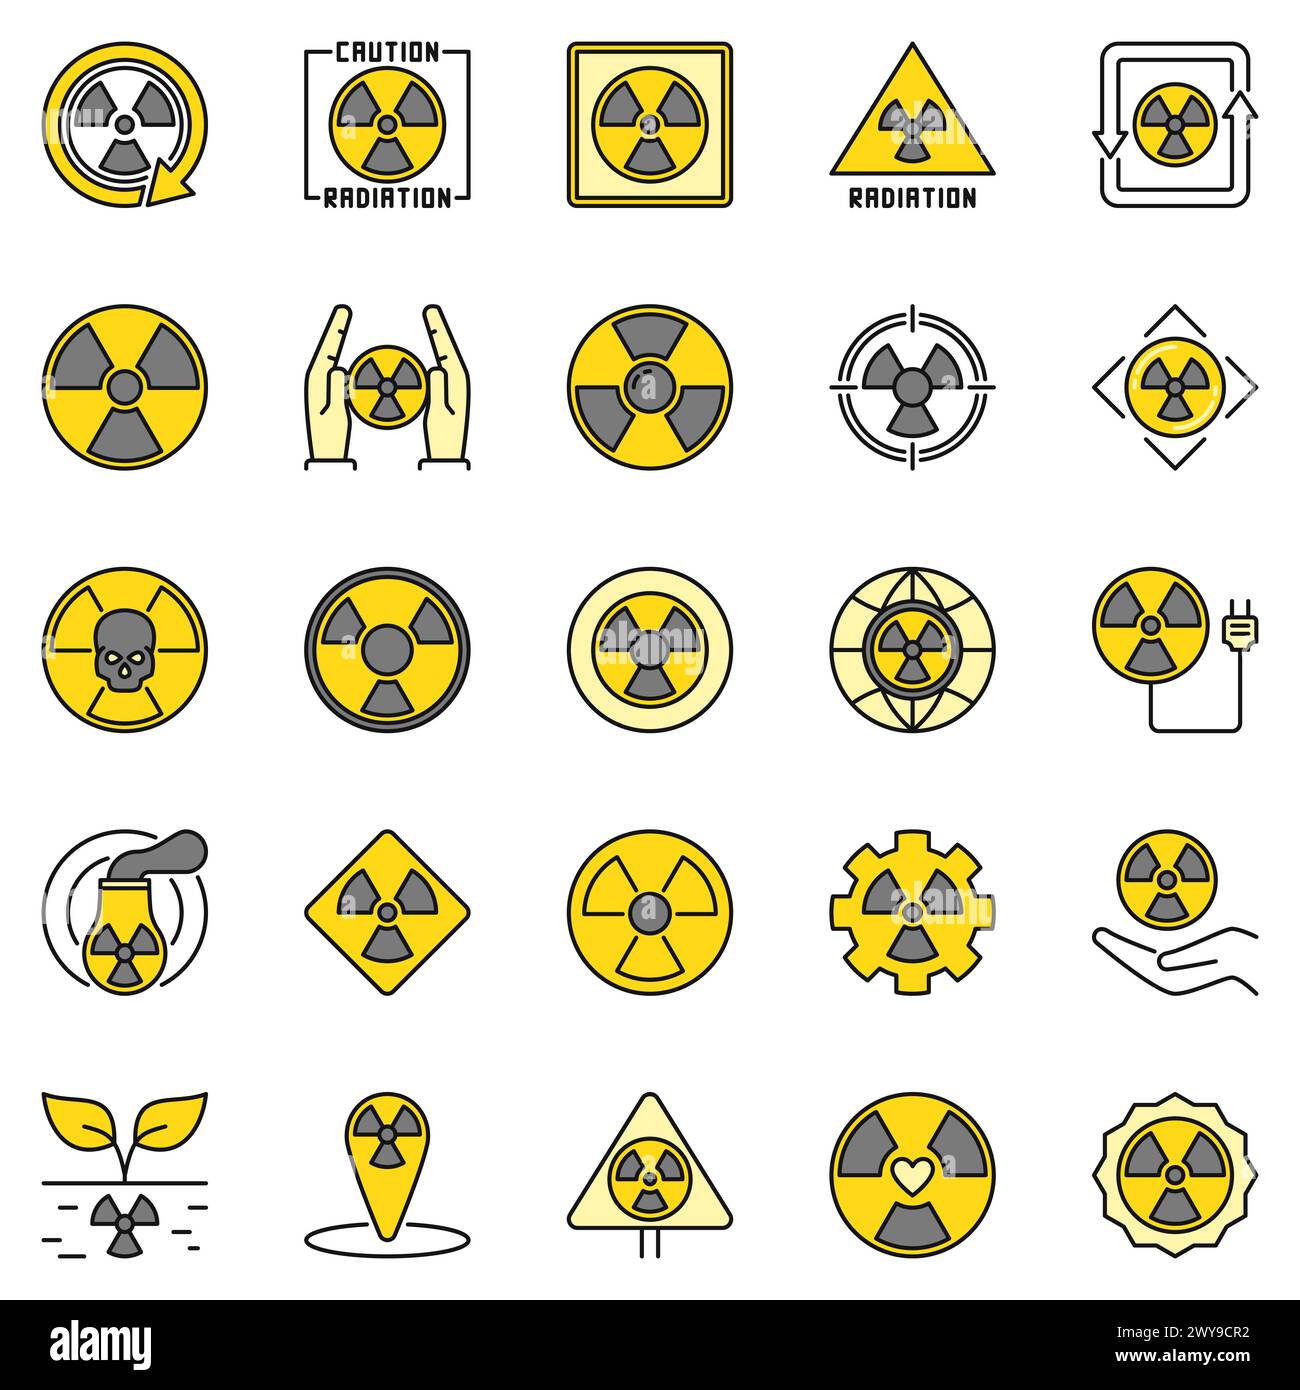 Radiation Warning colored icons. Nuclear Radioactive symbols and Radiological Contamination Danger concept signs set Stock Vector